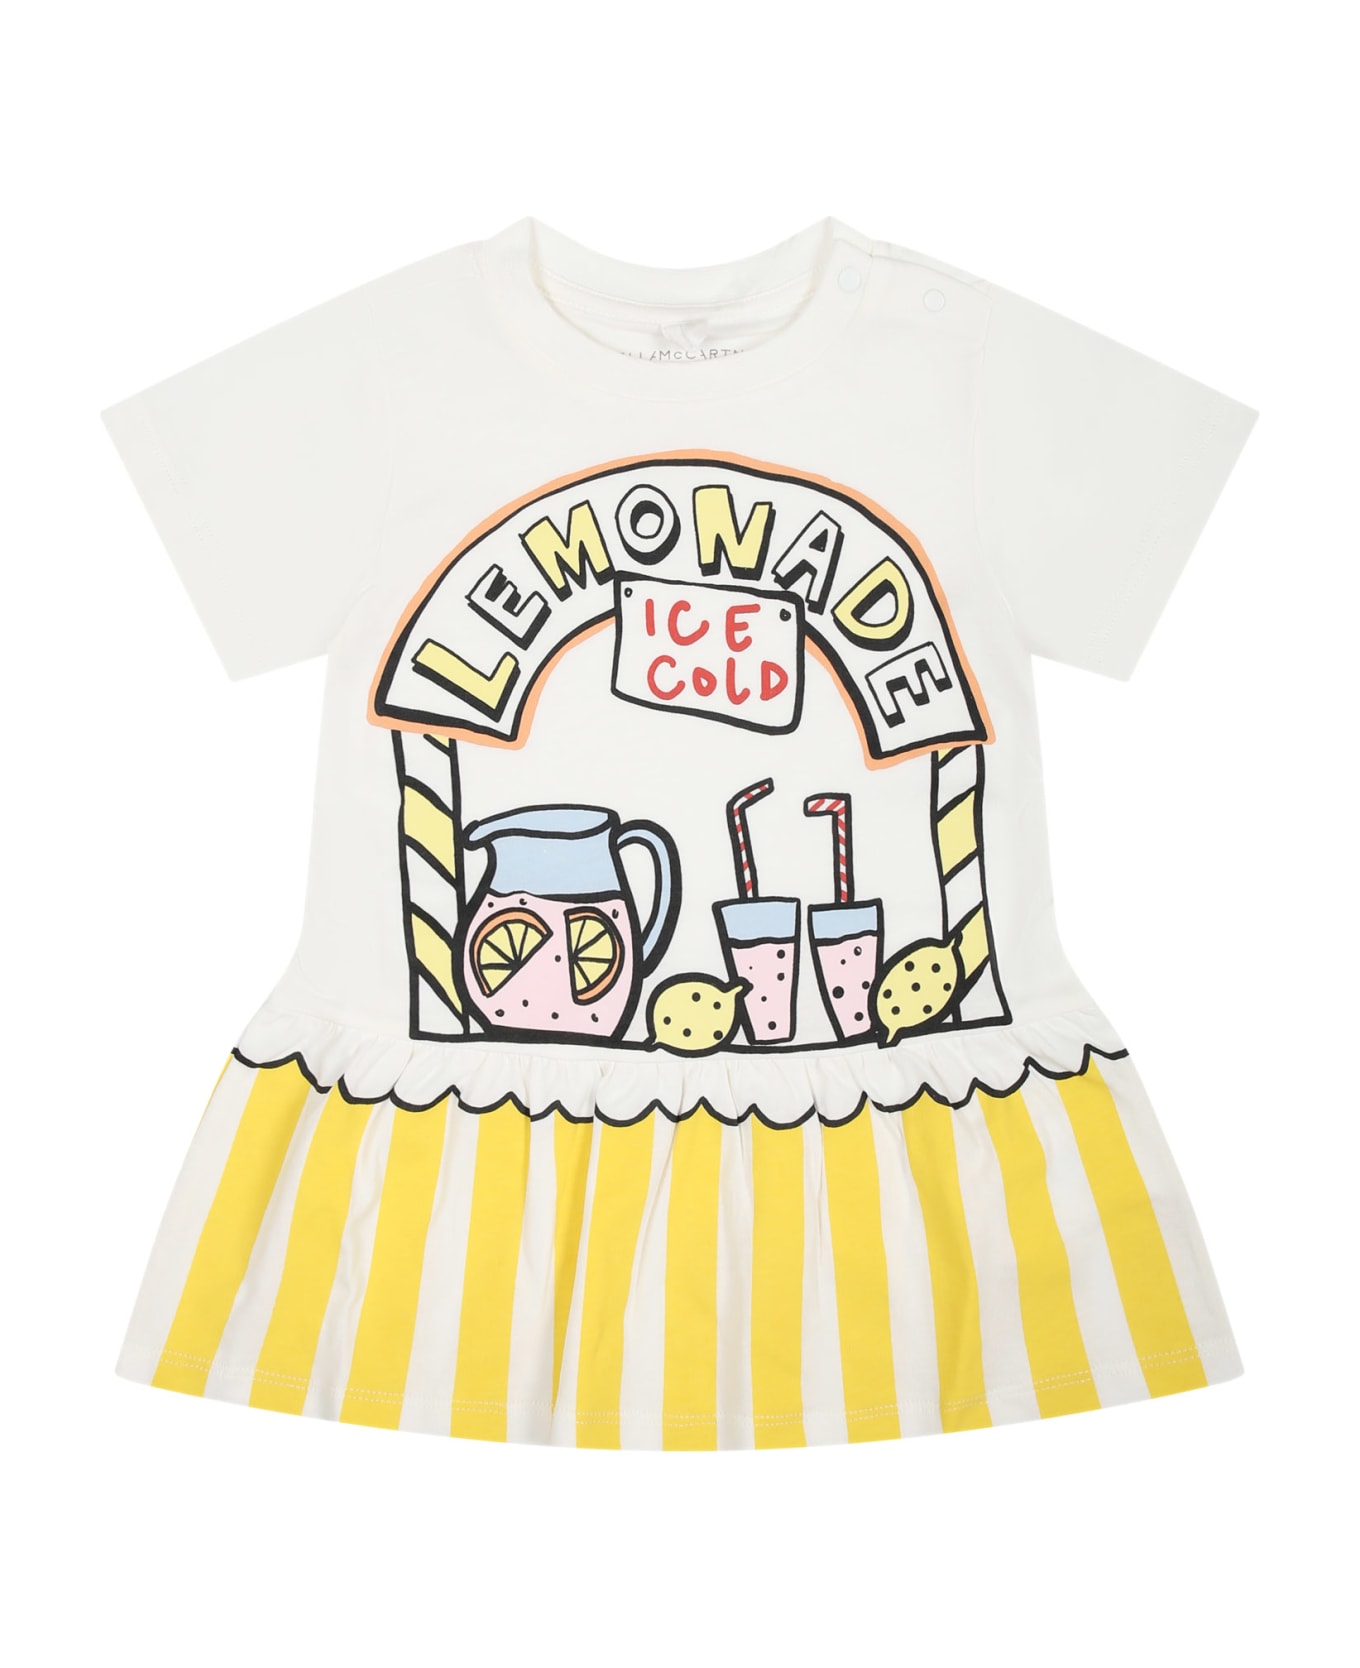 Stella McCartney Kids White Dress For Baby Girl With Multicolor Print - White